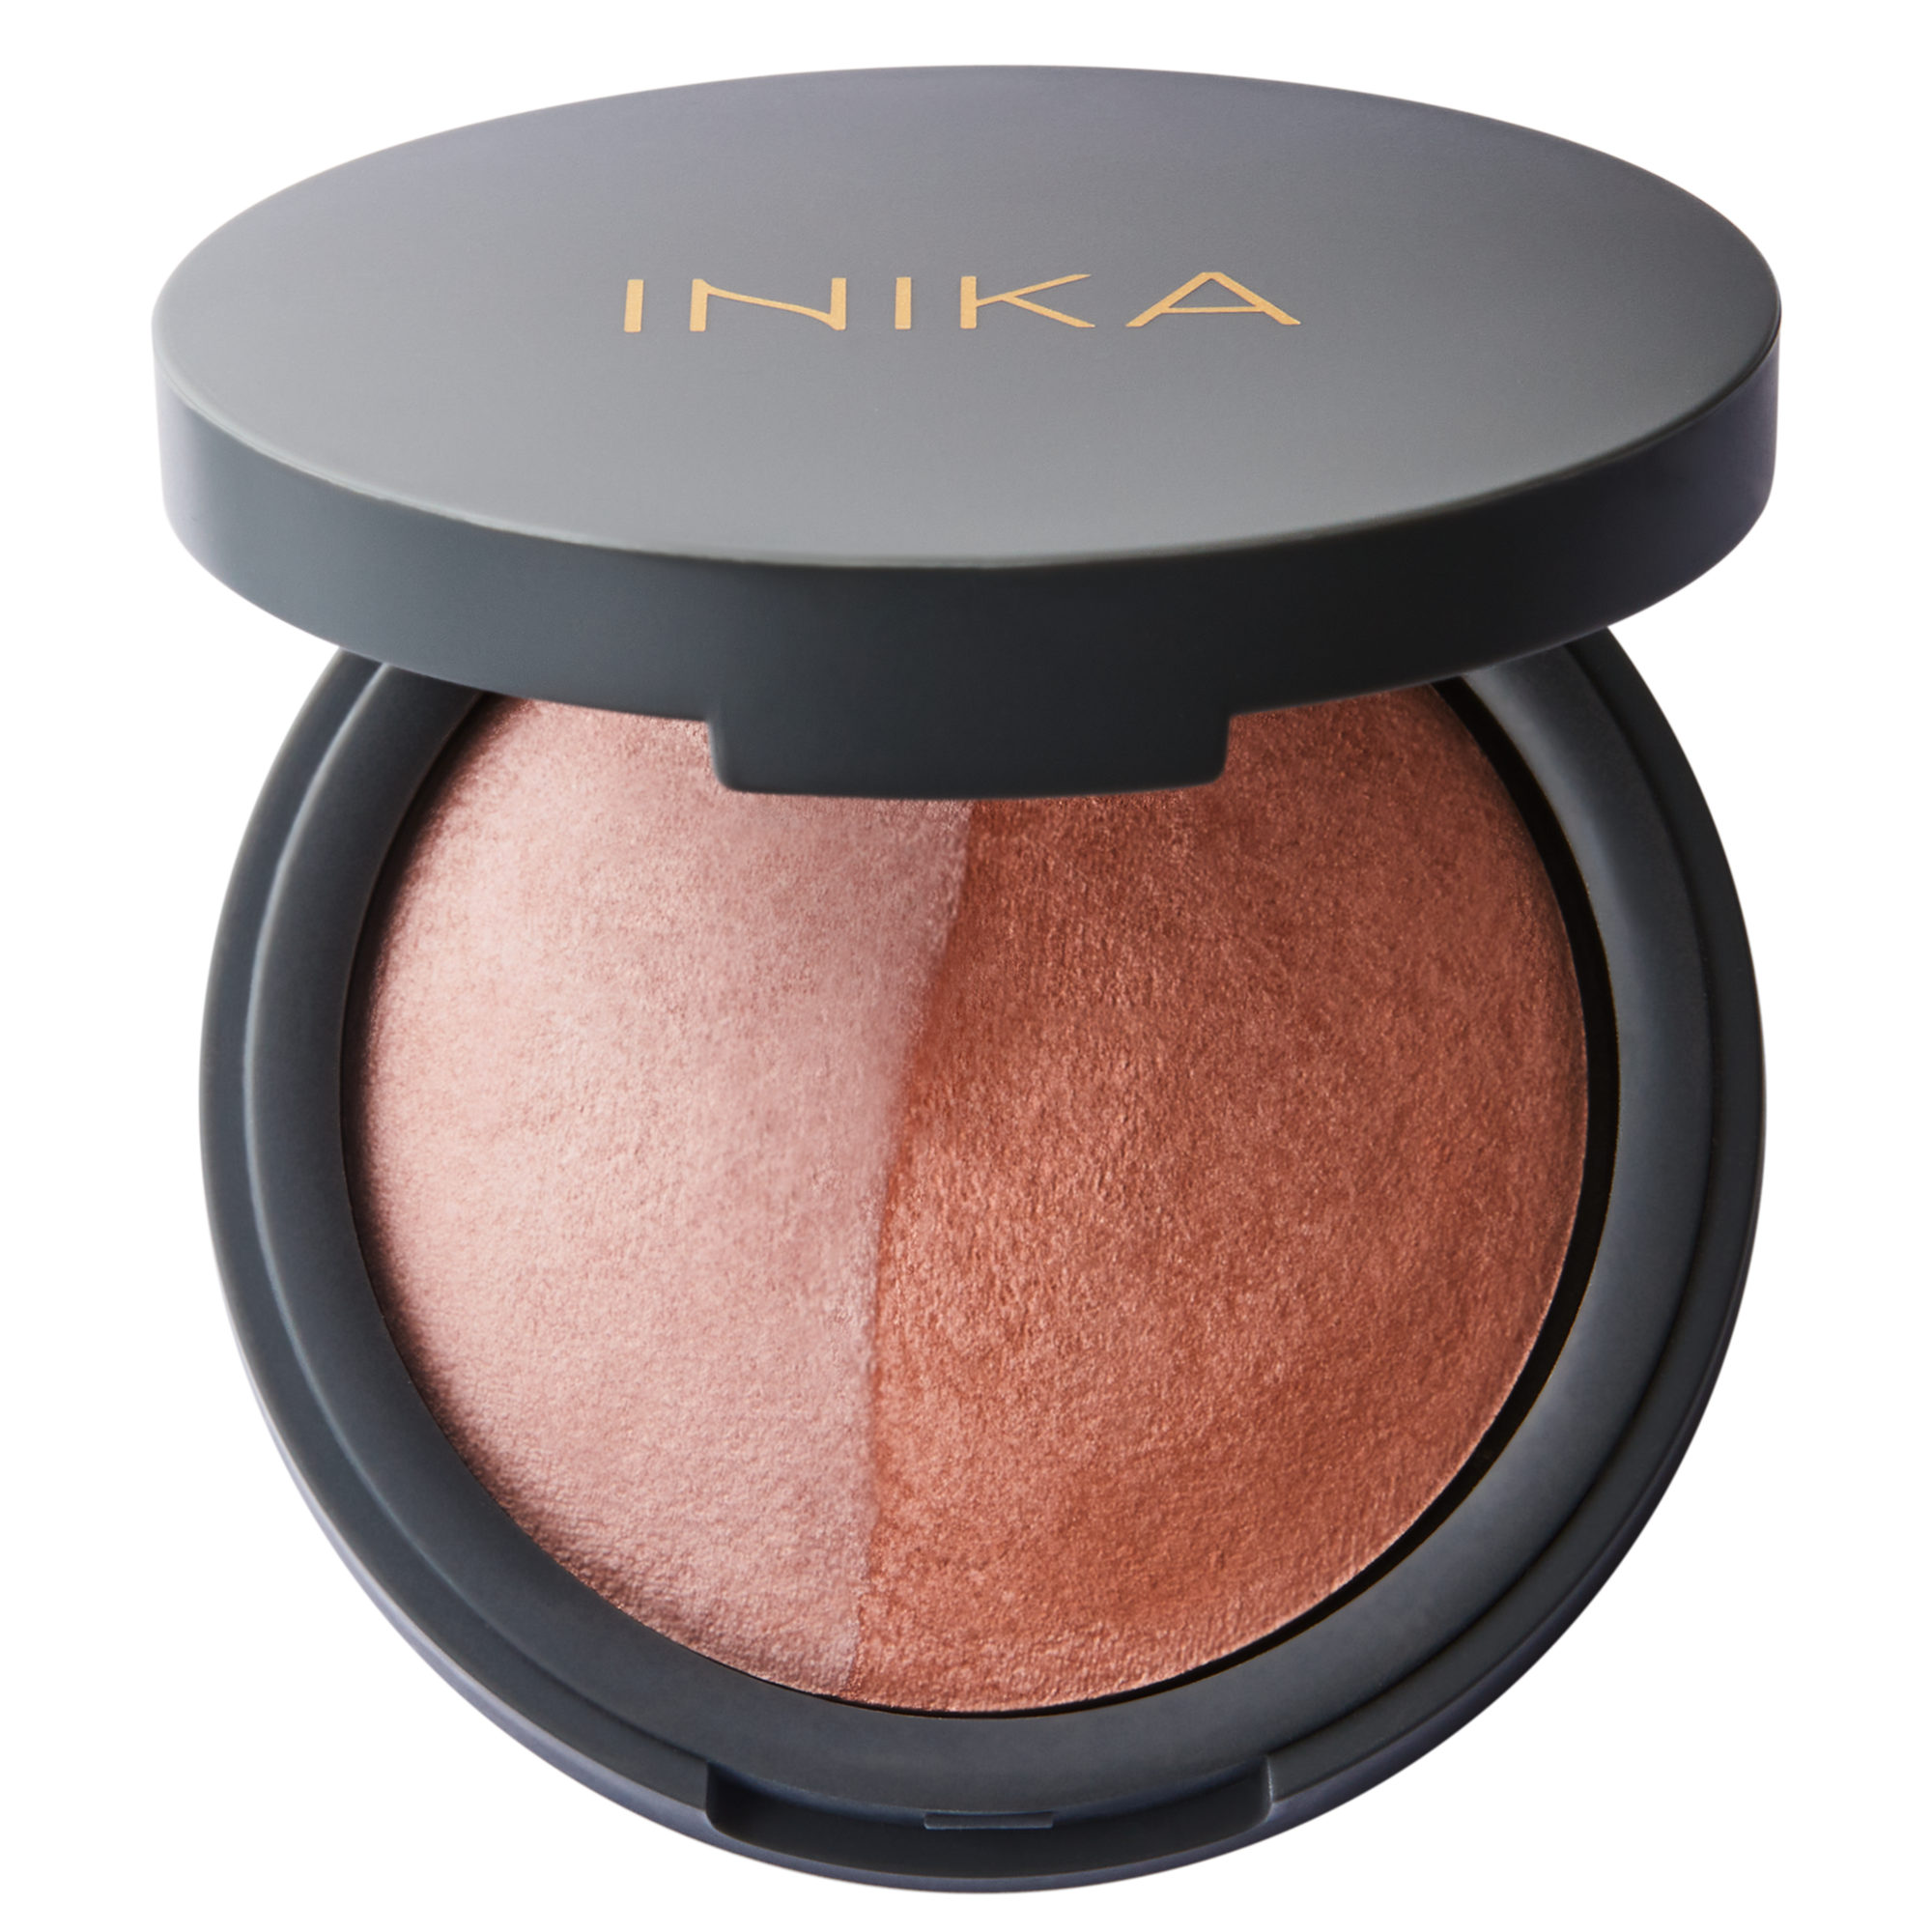 Inika Make up - Baked Mineral Blush Duo - Pink Tickle